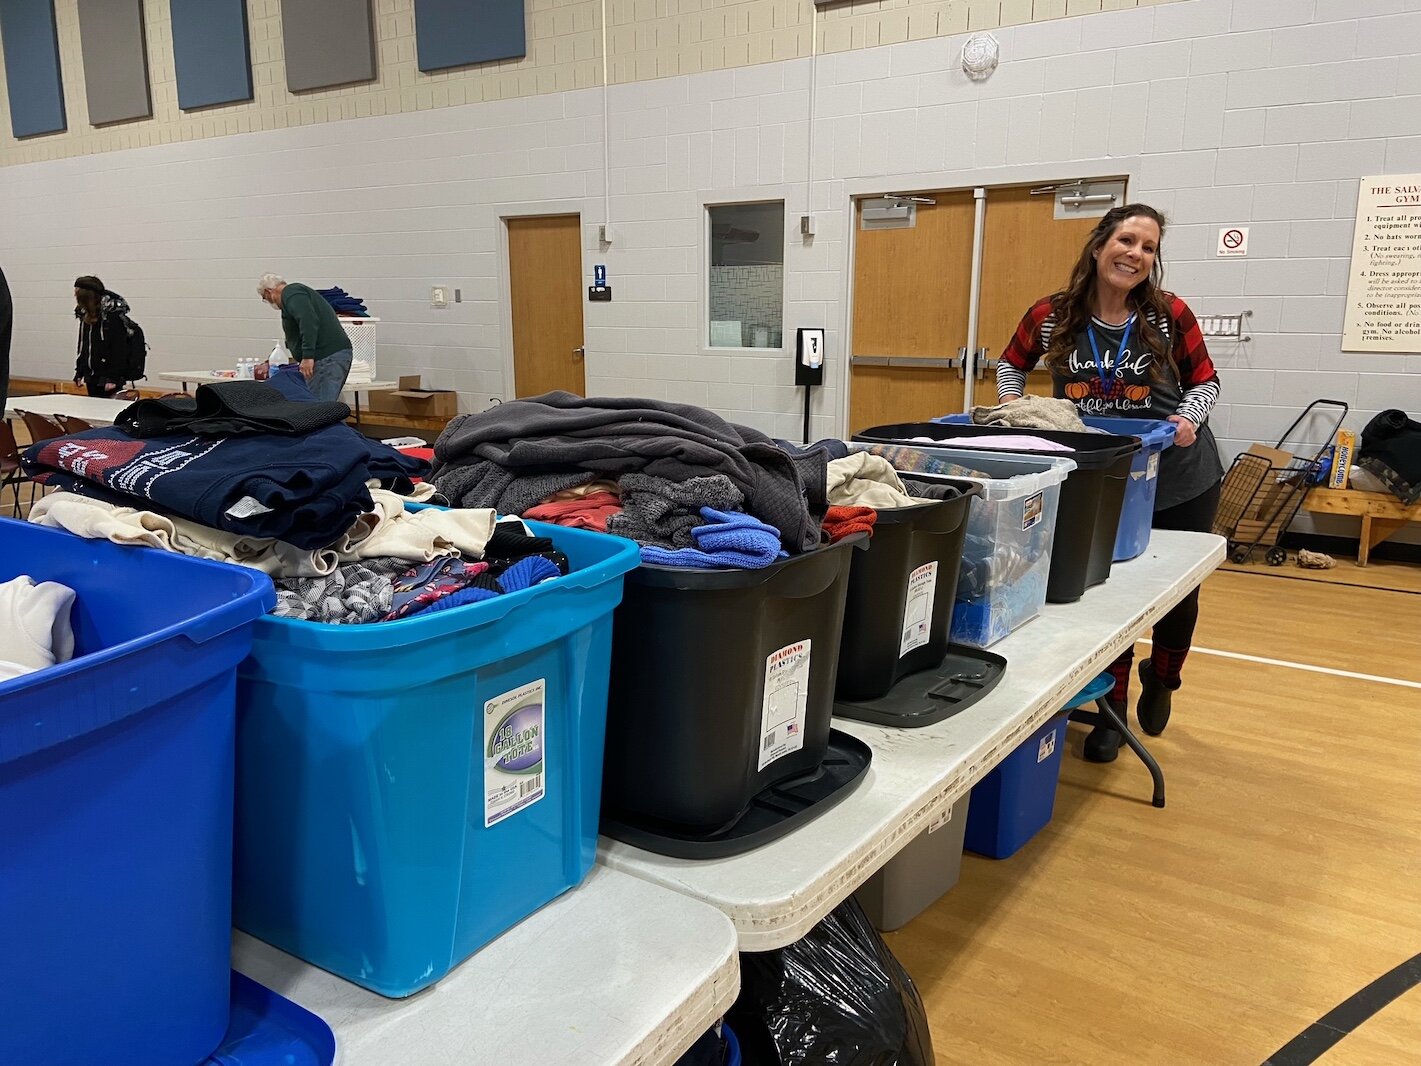 Tricia Meek, who helps organize donations and supplies, stands by bins of items to be supplied to those in need at the Community Warming Center.